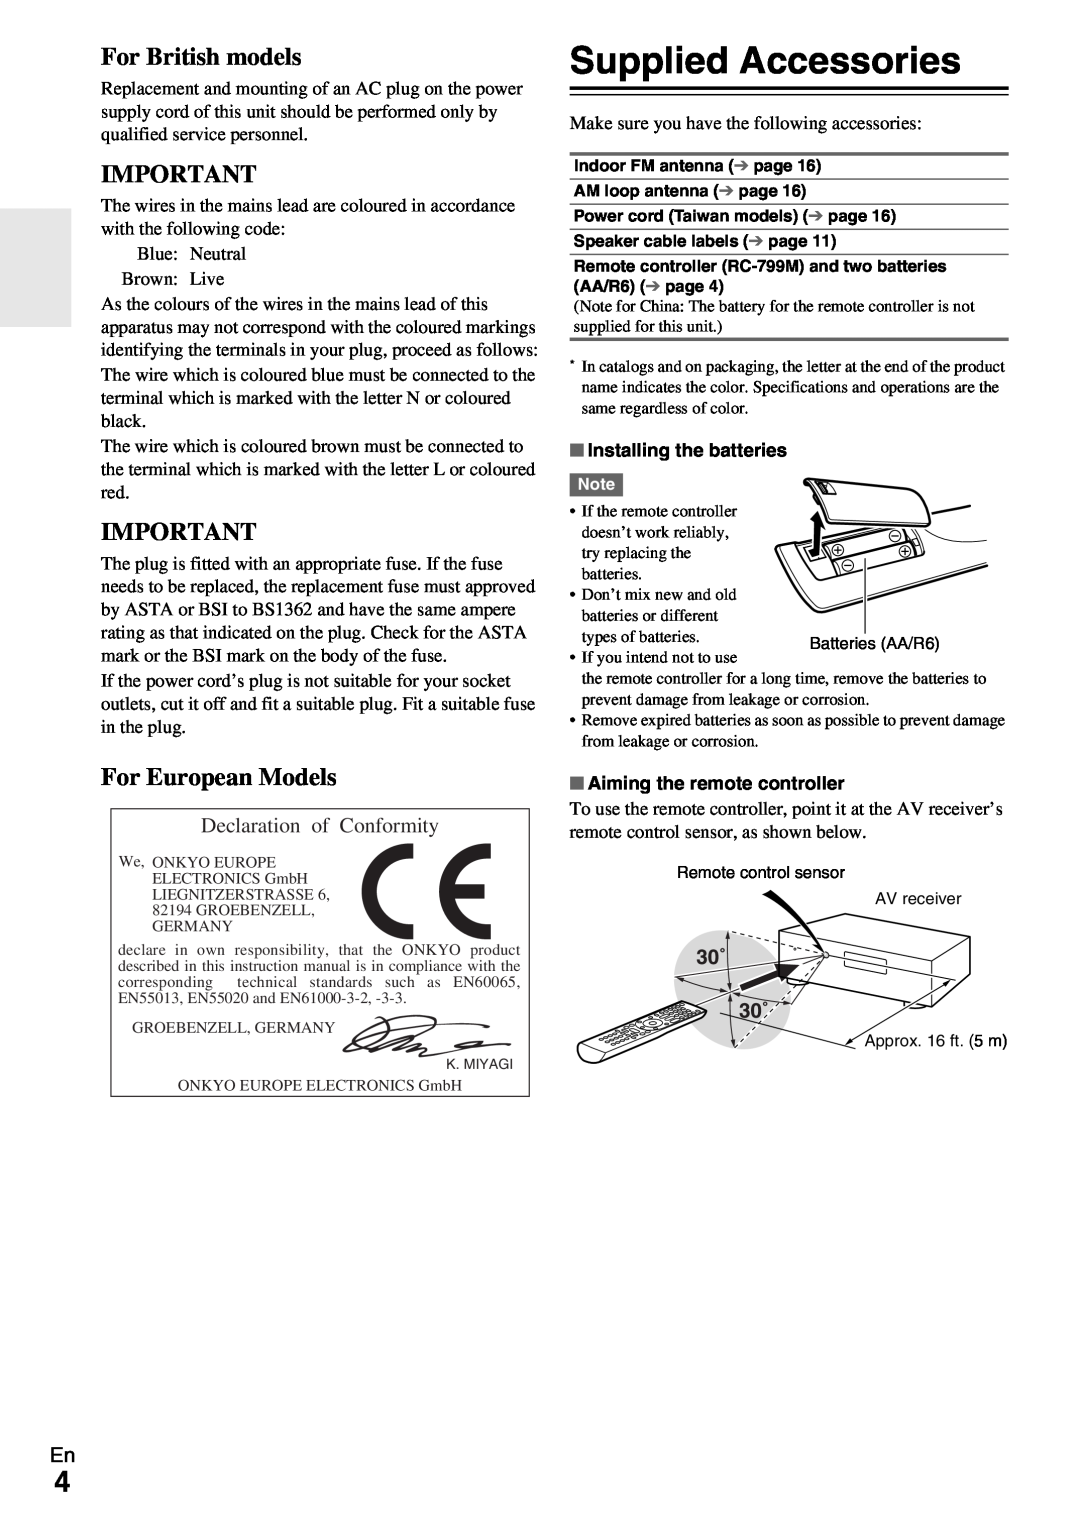 Onkyo TX-SR309 instruction manual Supplied Accessories, For British models, For European Models, Declaration of Conformity 